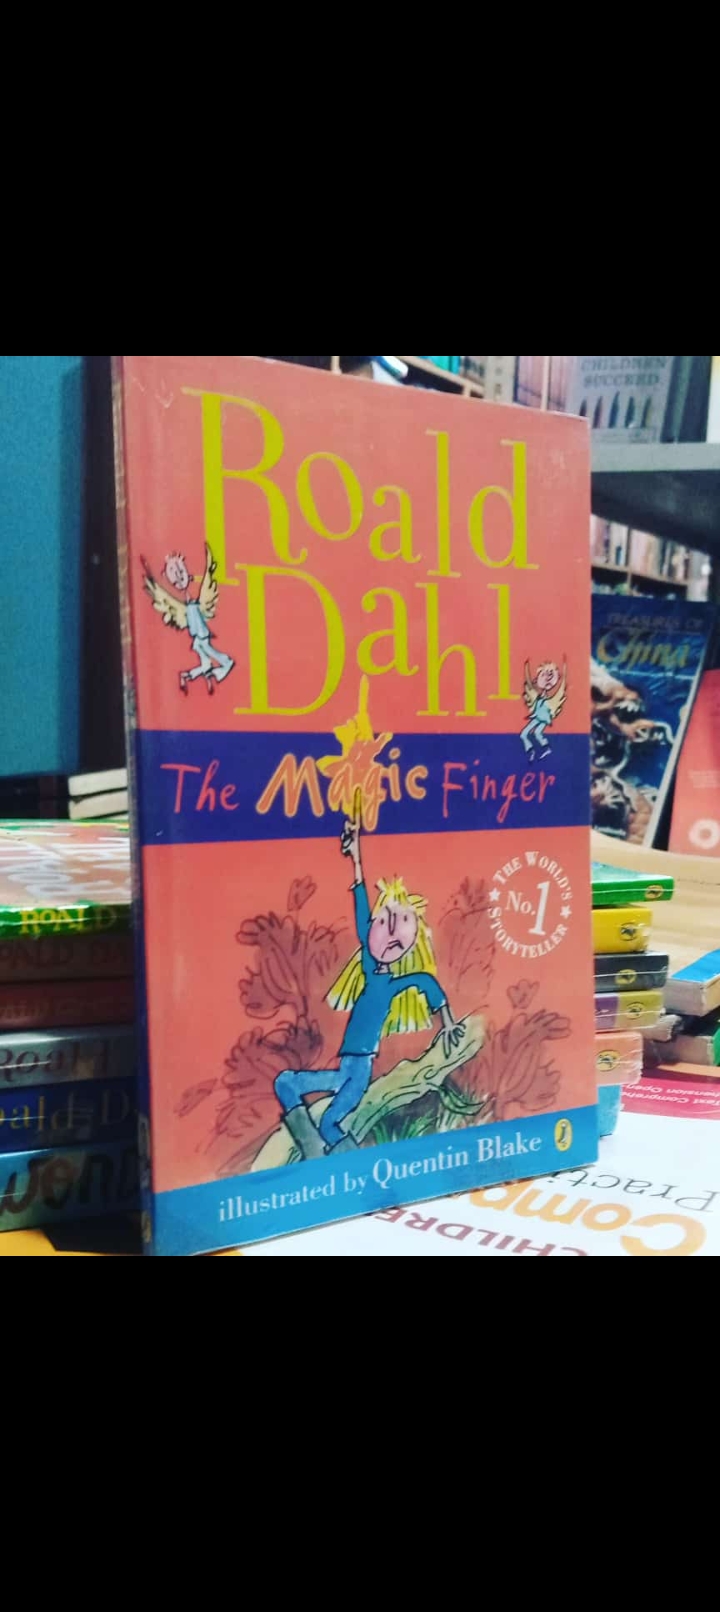 the magic finger by roald dahl. new paperback